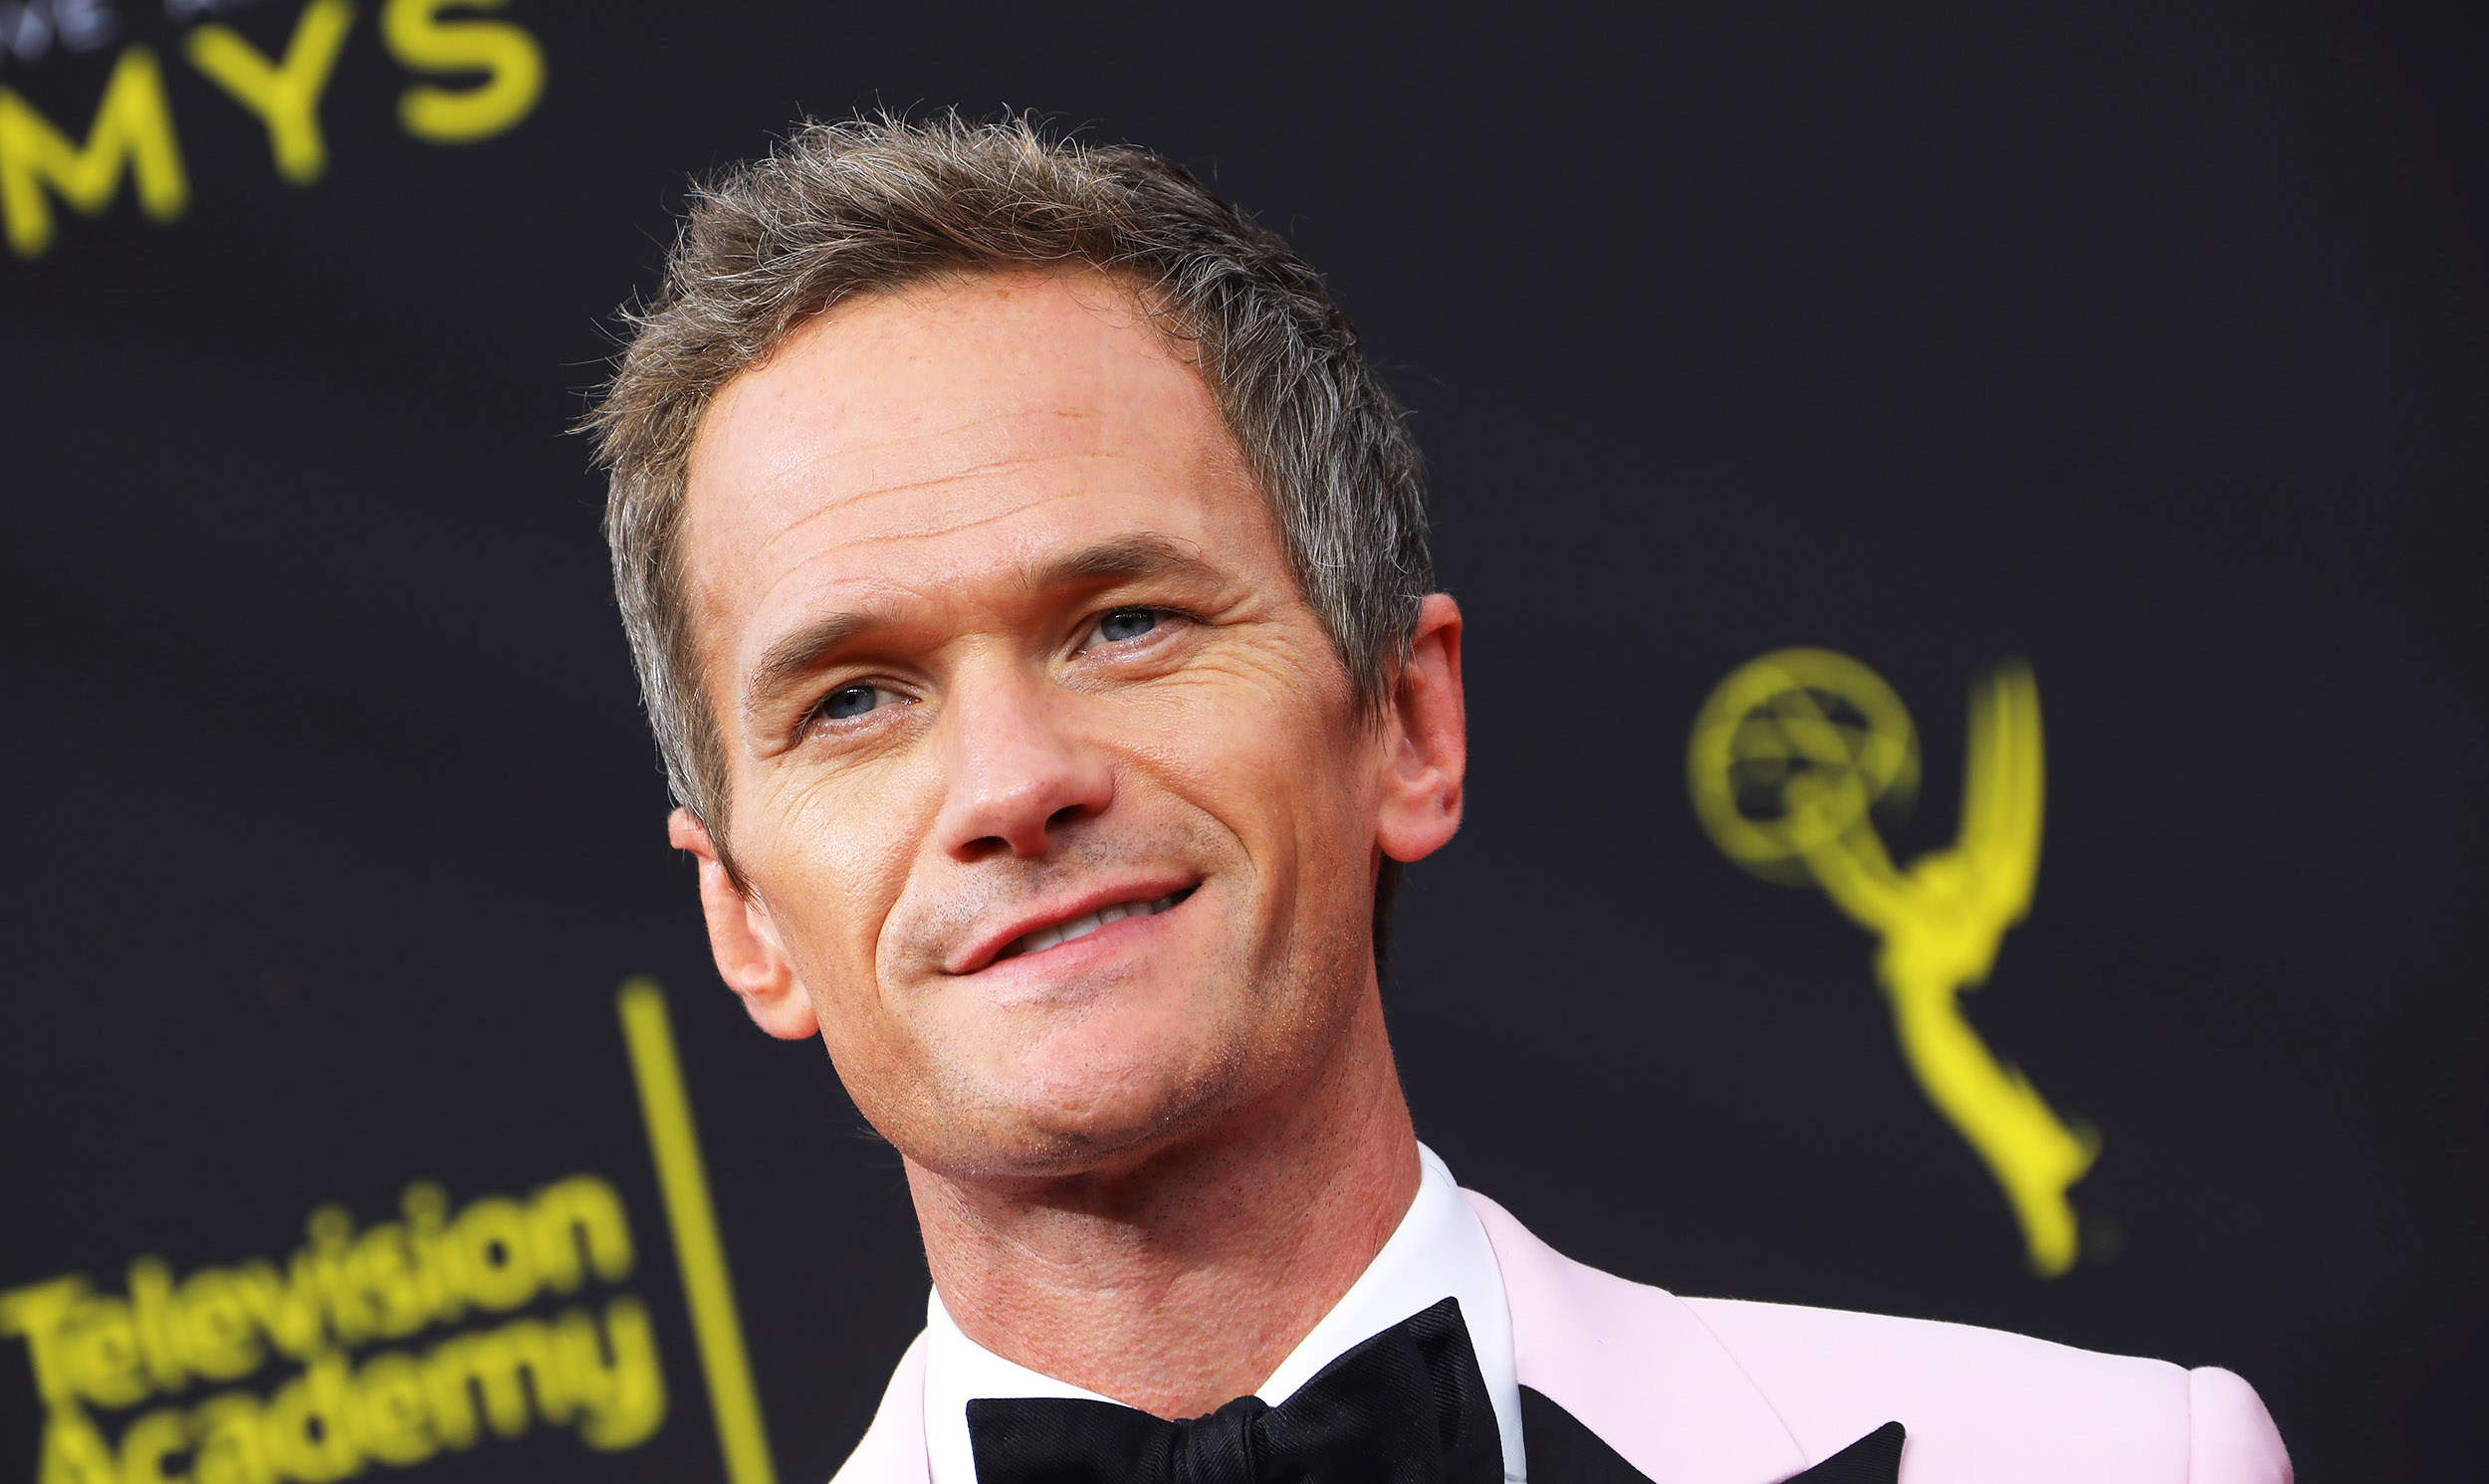 Neil Patrick Harris Nude Sex Videos And Naked Photos Collection